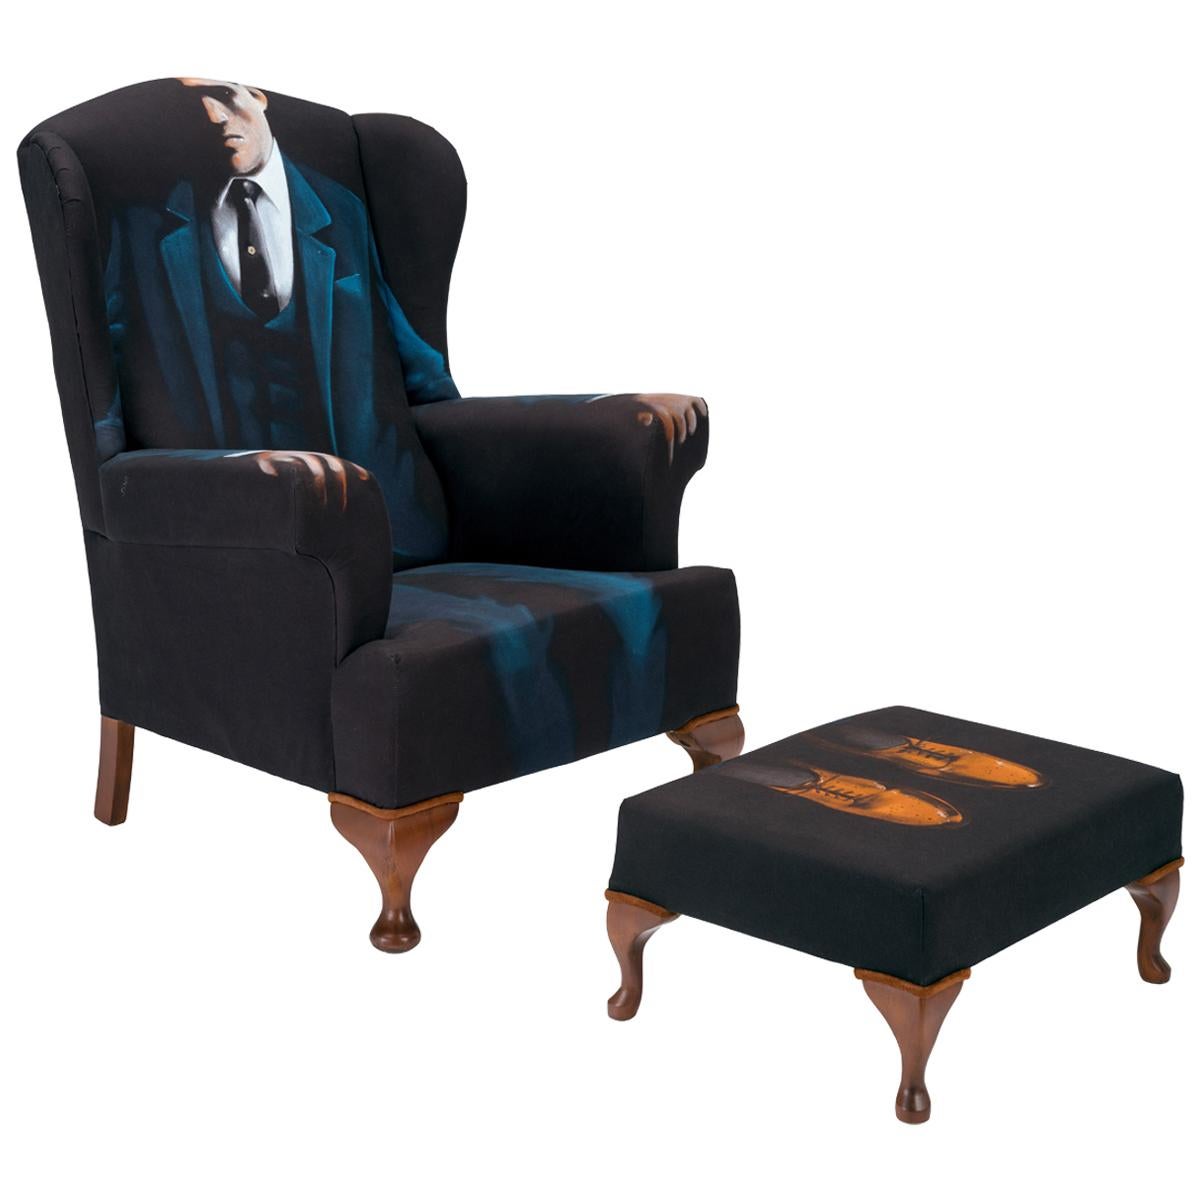 Midcentury Wing Back Armchair 'the Mafia Boss’  Bespoke Unique One of a Kind